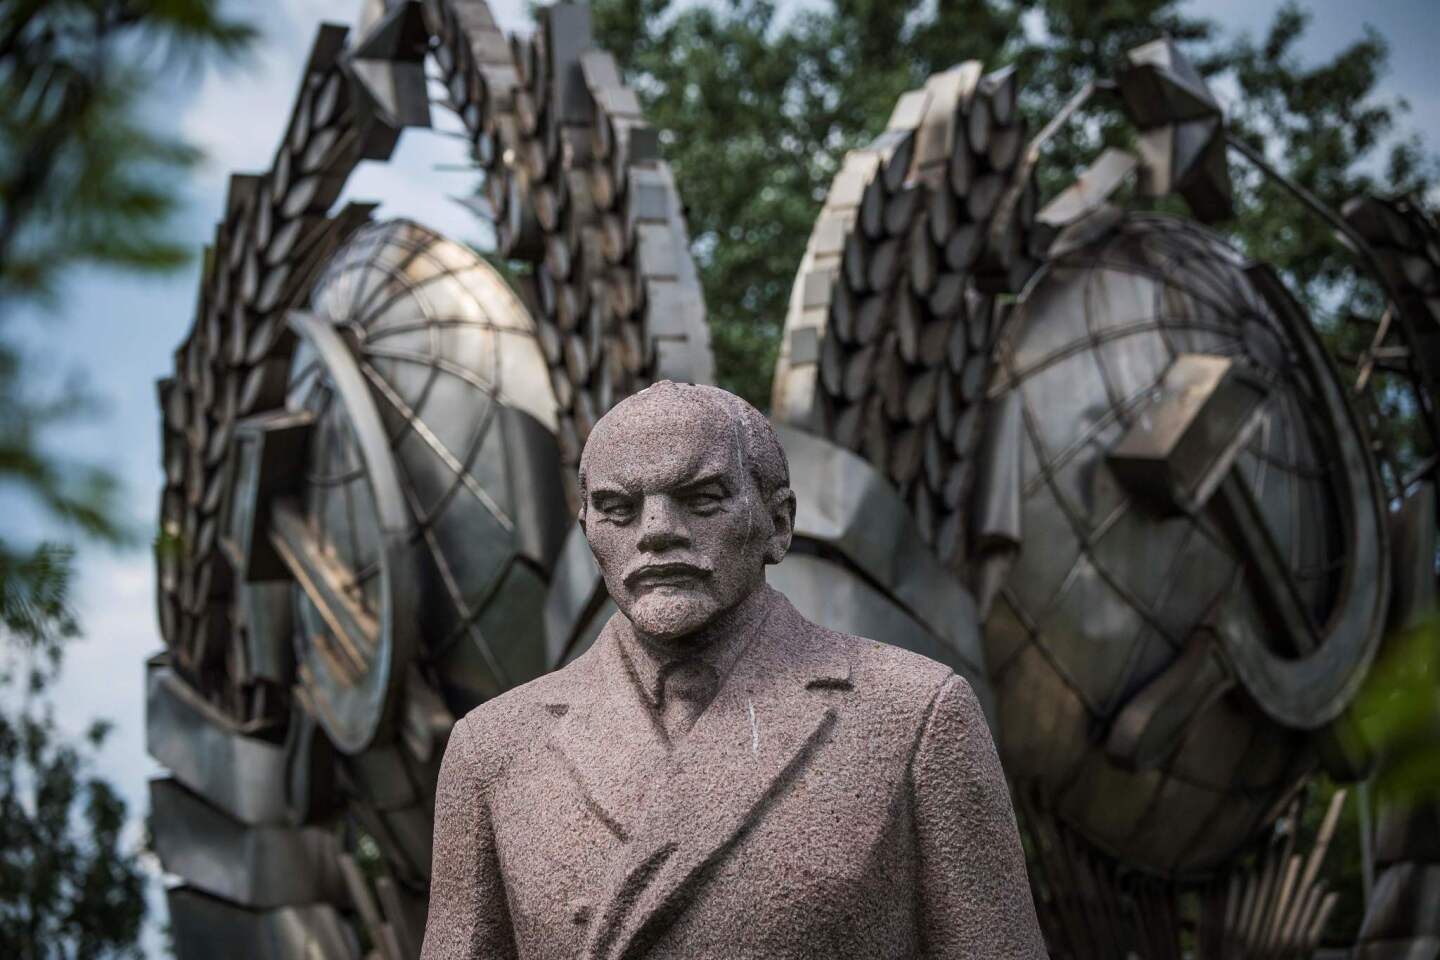 A sculpture of the founder of the Soviet Union, Vladimir Lenin, next to a state emblem of the USSR at the Muzeon Sculpture Park in Moscow.